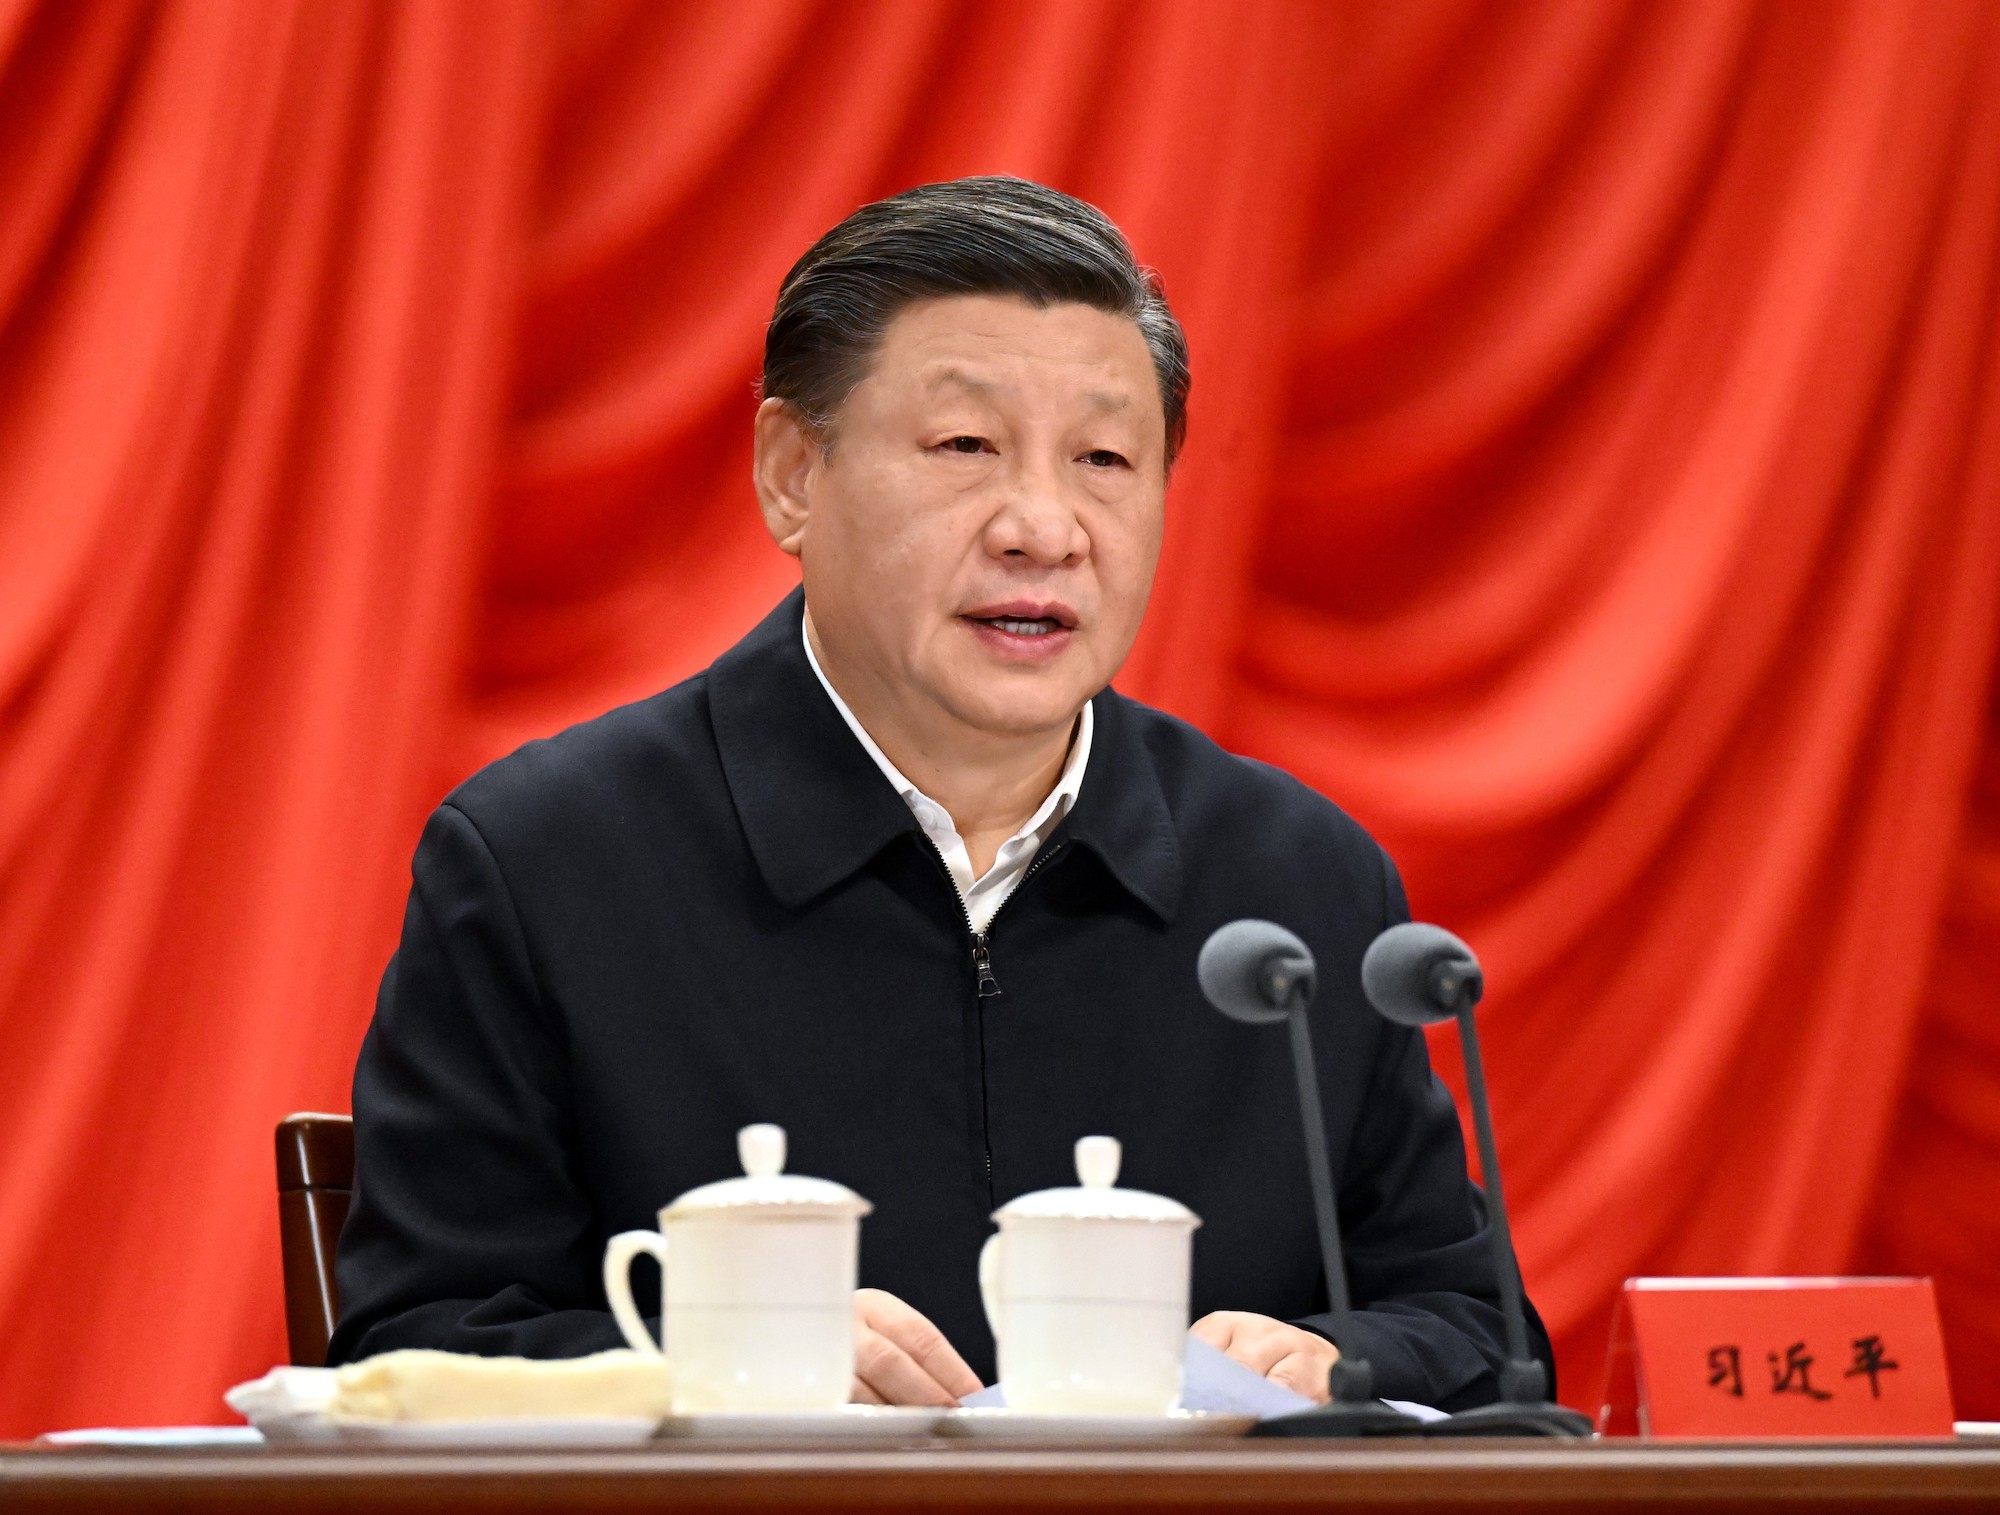 Xi Jinping addresses an academic conference on February 7.